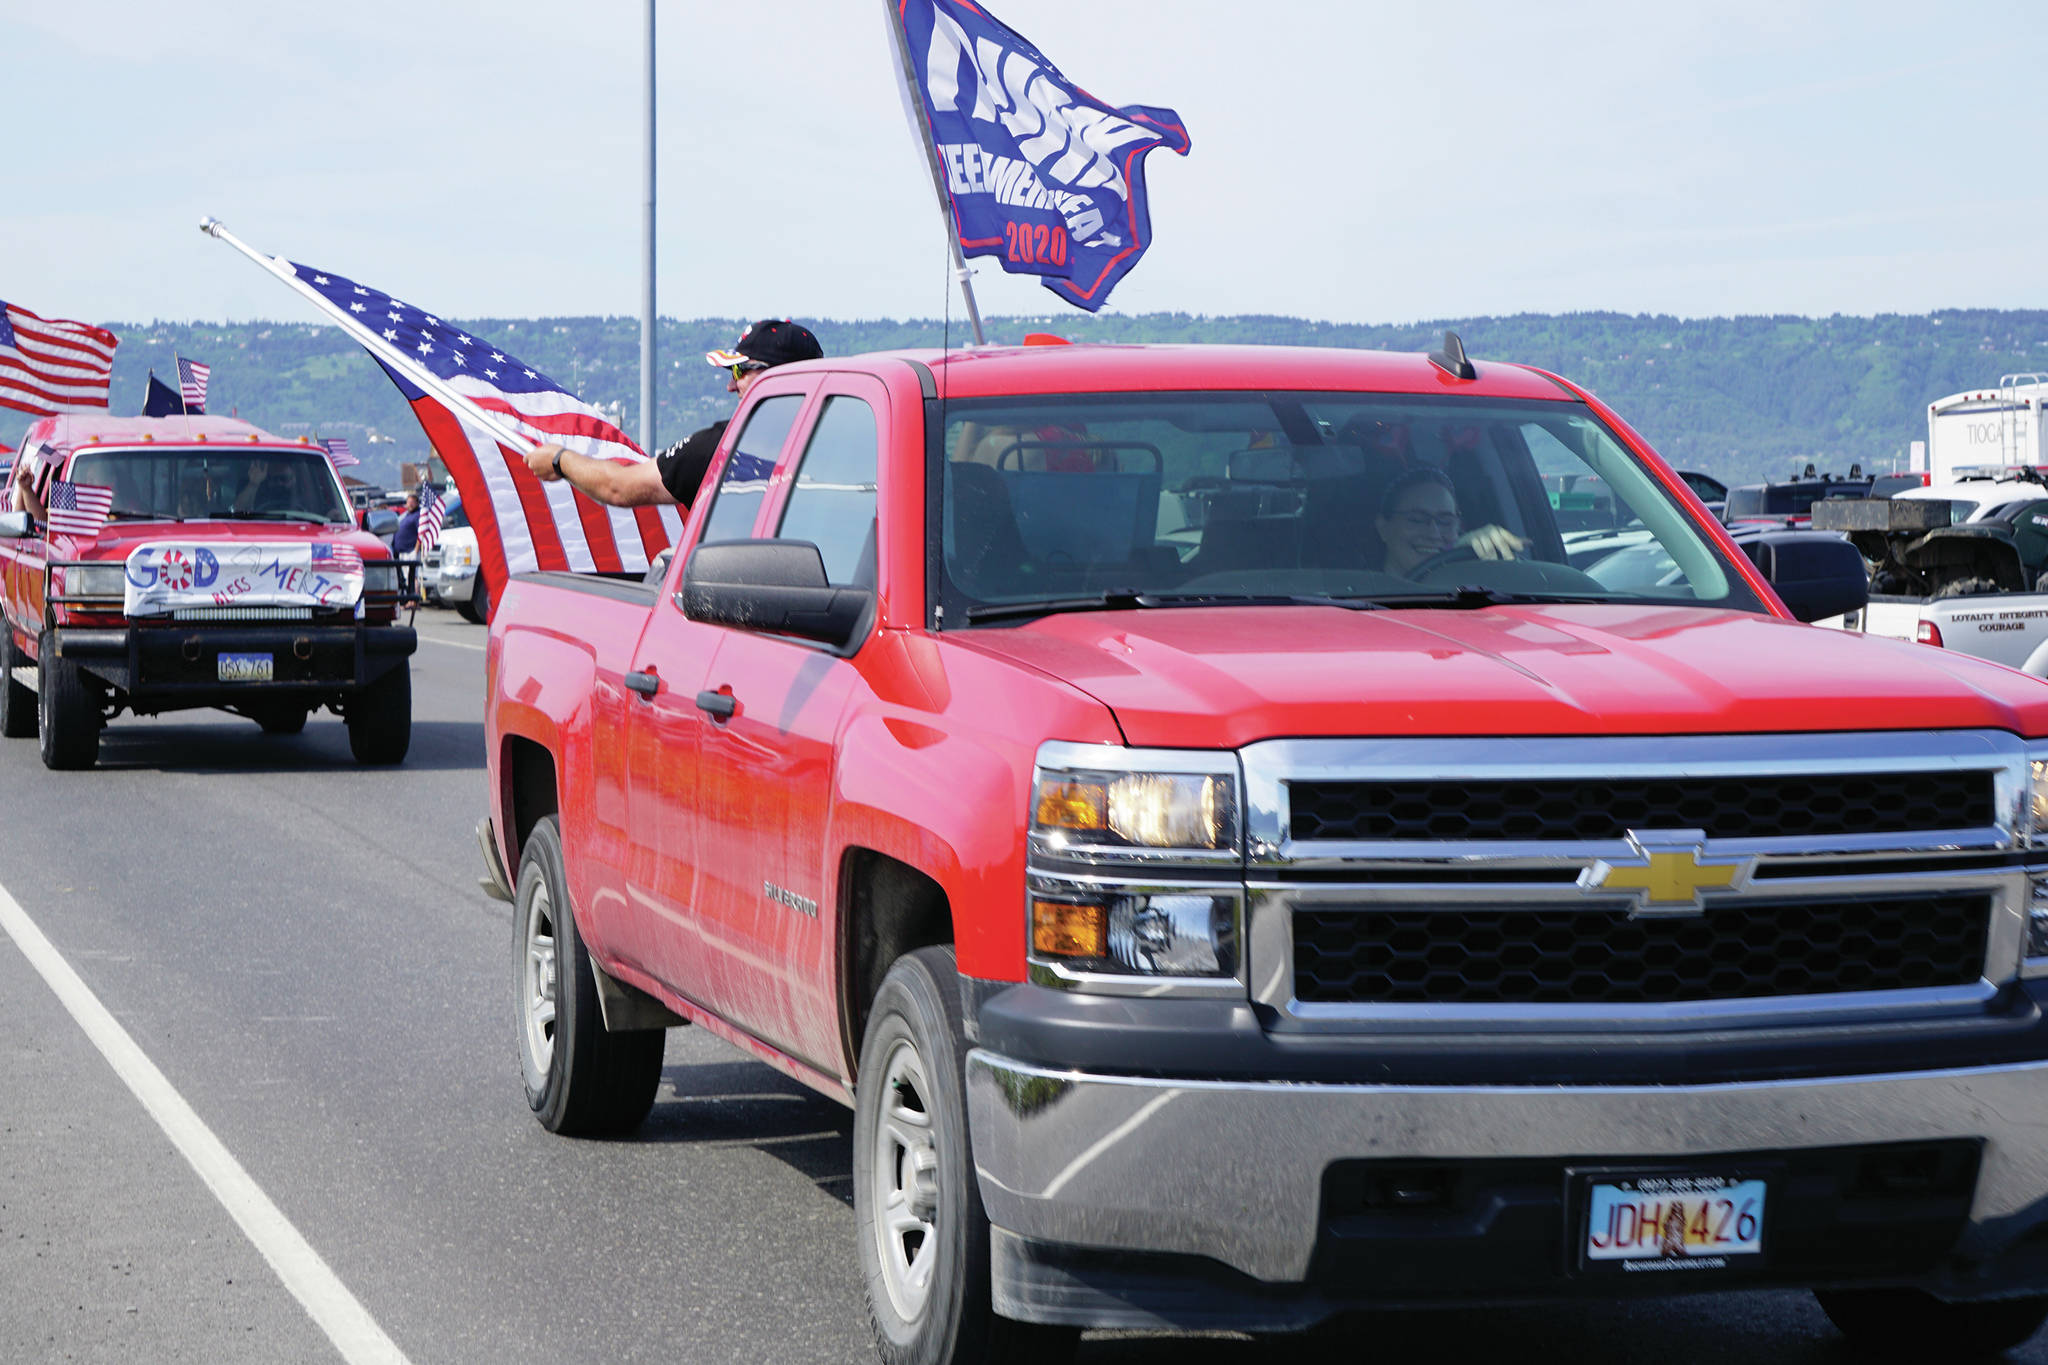 A woman drives a truck with a “Trump 2020” flag on July 4, 2020, part of an Independence Day parade on Saturday, July 4, 2020 that went from Soundview Avenue on the Sterling Highway to the end of the Homer Spit in Homer, Alaska. (Photo by Michael Armstrong/Homer News)